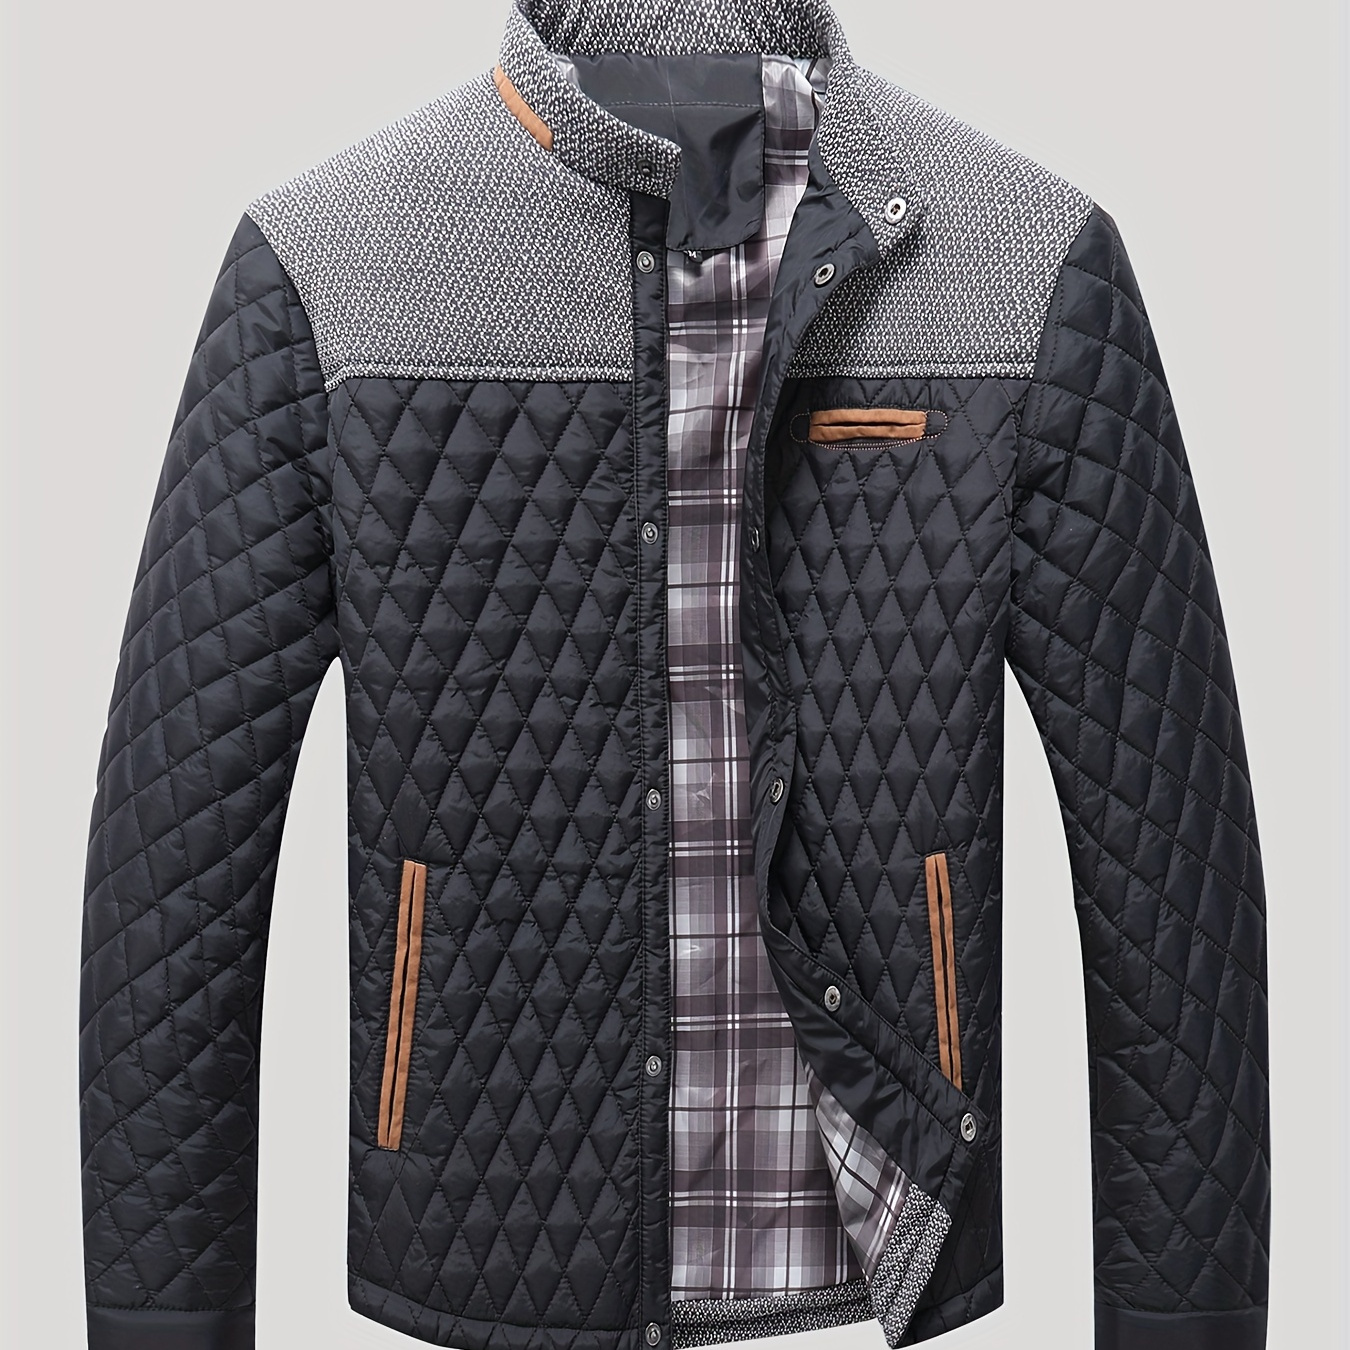 

Men's Casual Stand Collar Jacket, Chic Argyle Pattern Windproof Jacket